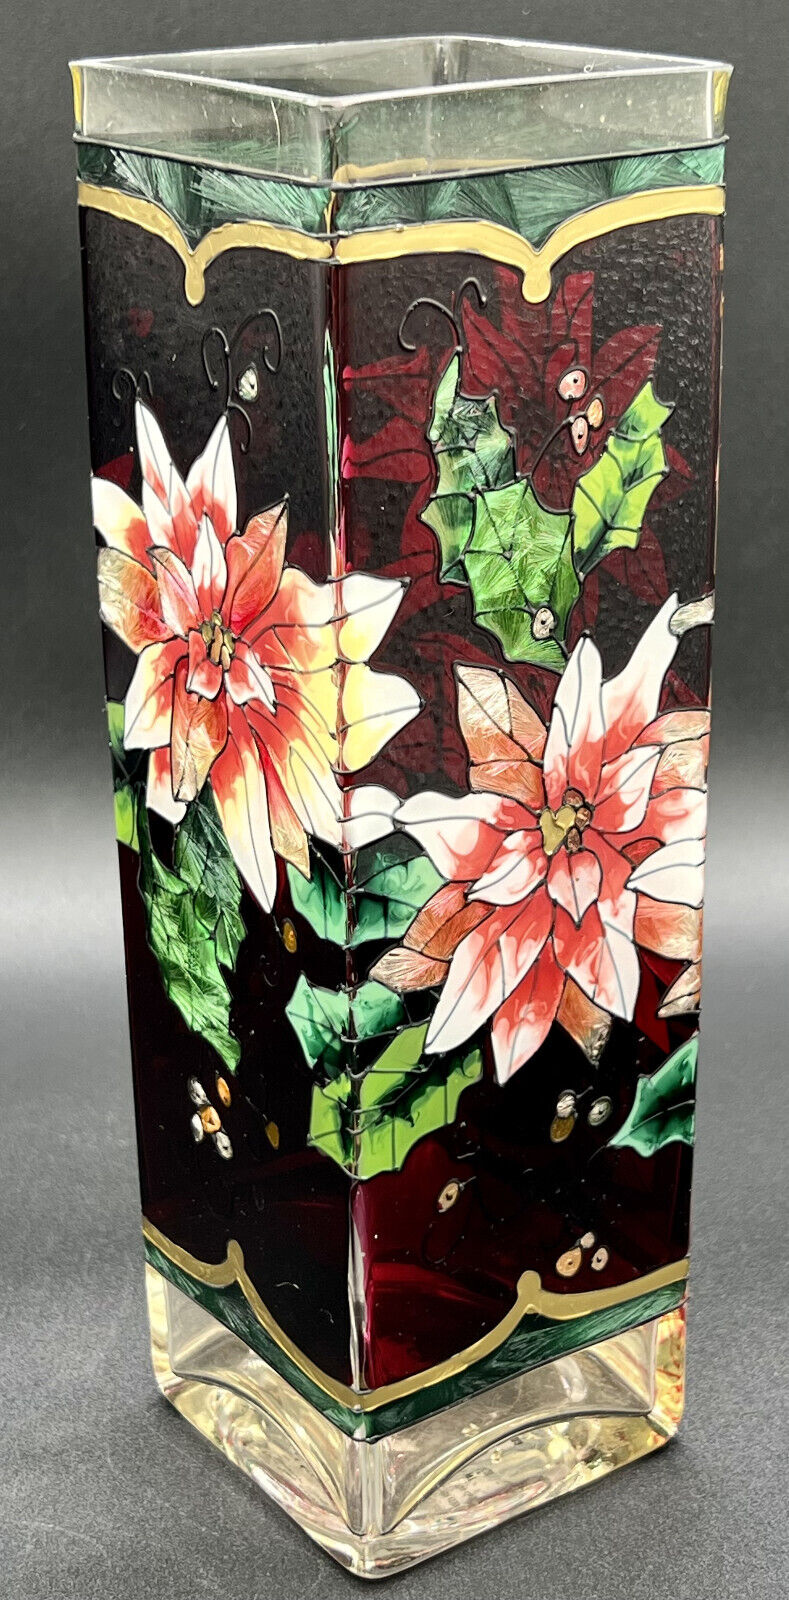 Vintage 10” Joan Baker Designs Hand Painted Stained Glass Poinsettia Vase